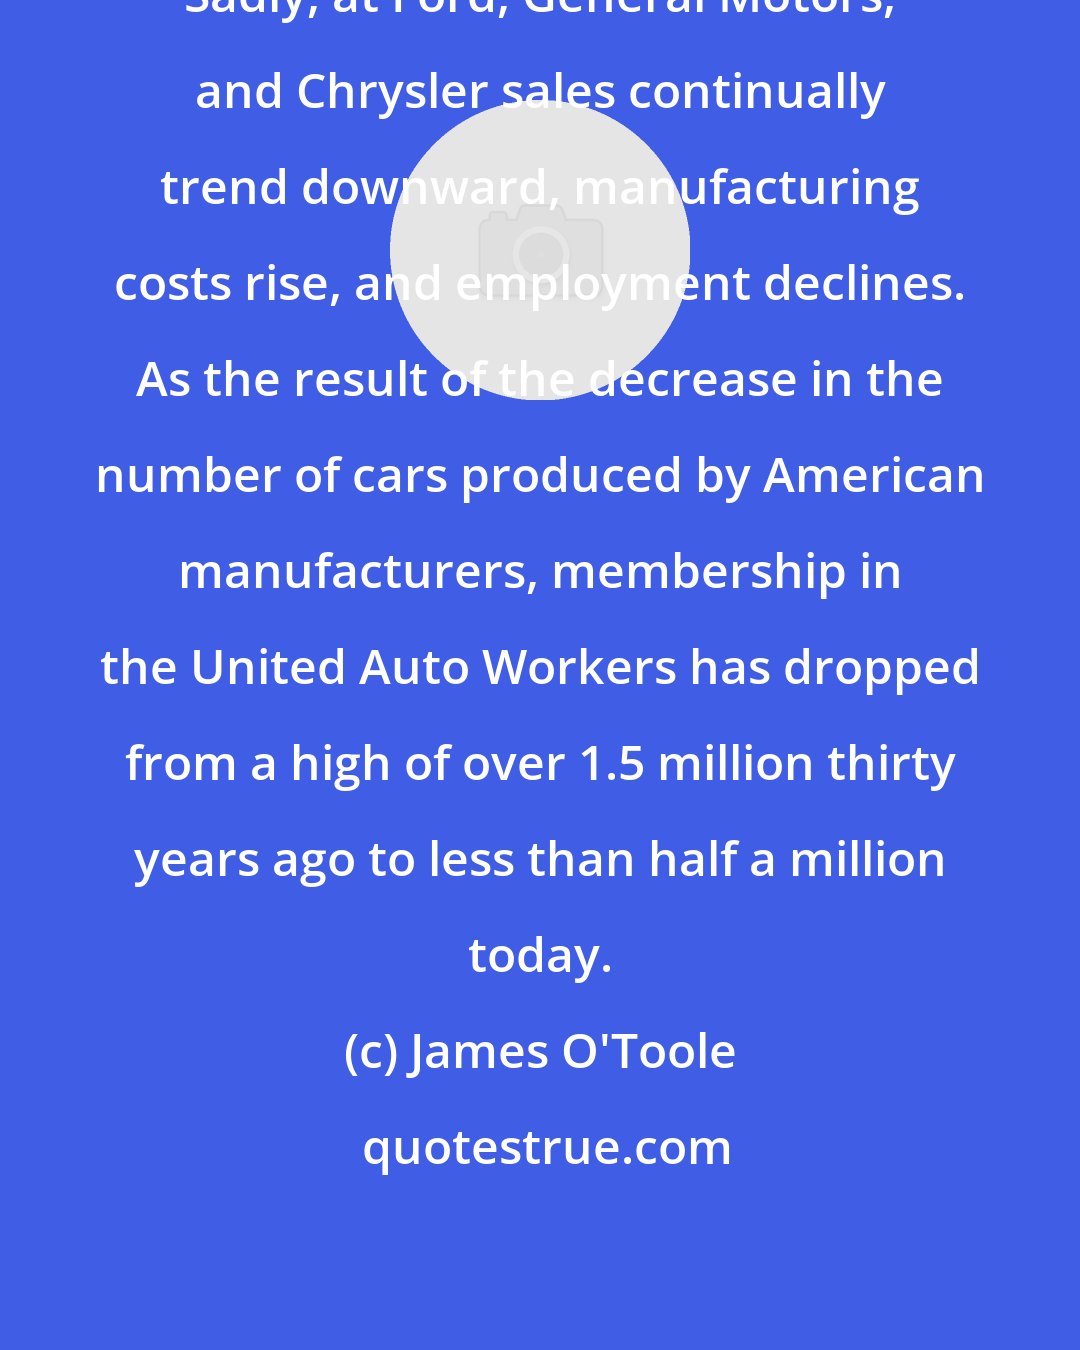 James O'Toole: Sadly, at Ford, General Motors, and Chrysler sales continually trend downward, manufacturing costs rise, and employment declines. As the result of the decrease in the number of cars produced by American manufacturers, membership in the United Auto Workers has dropped from a high of over 1.5 million thirty years ago to less than half a million today.